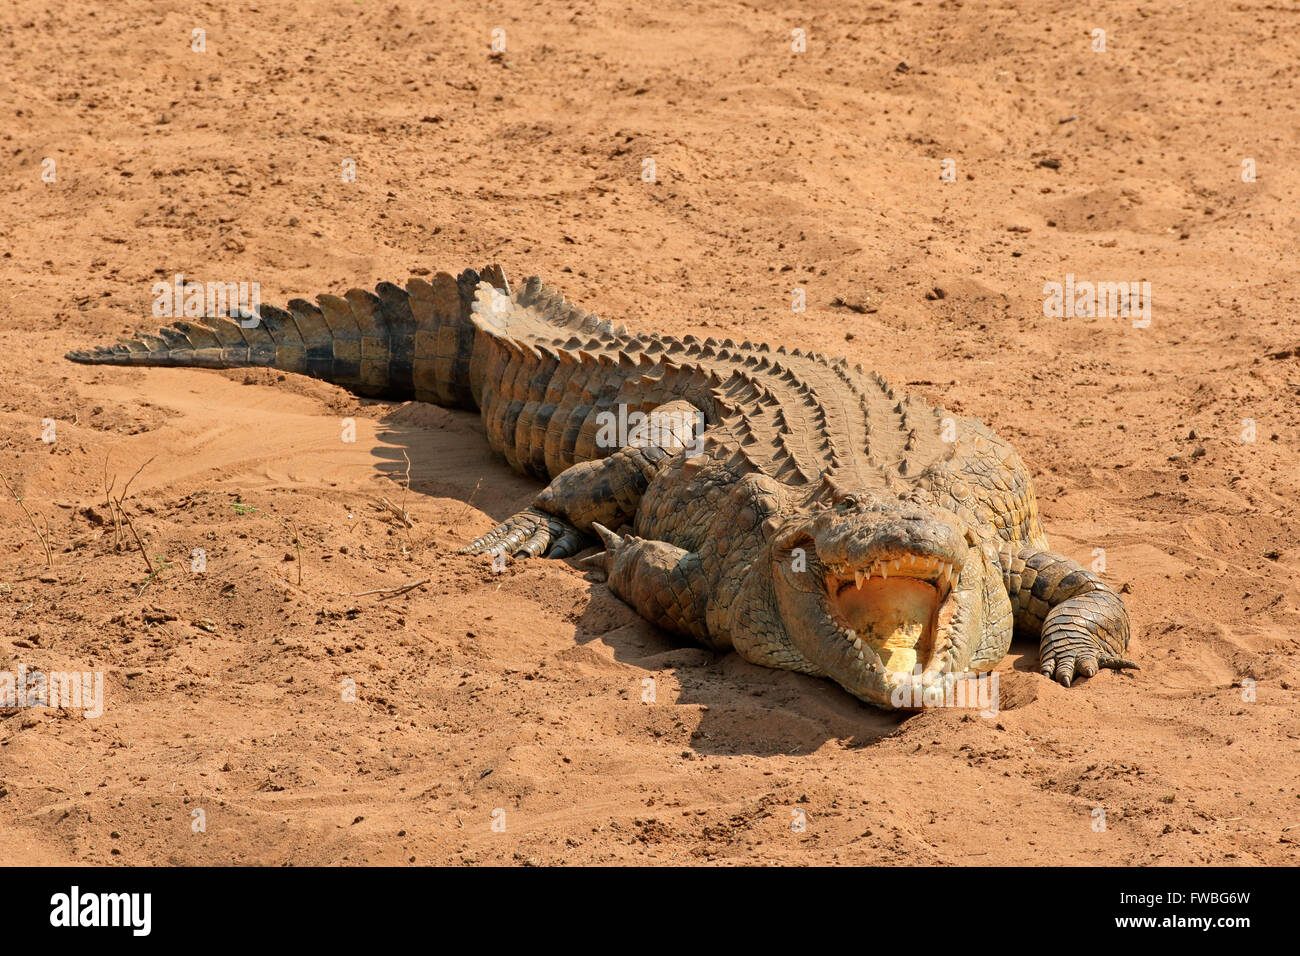 A Nile crocodile (Crocodylus niloticus) basking with open jaws, Kruger National Park, South Africa Stock Photo